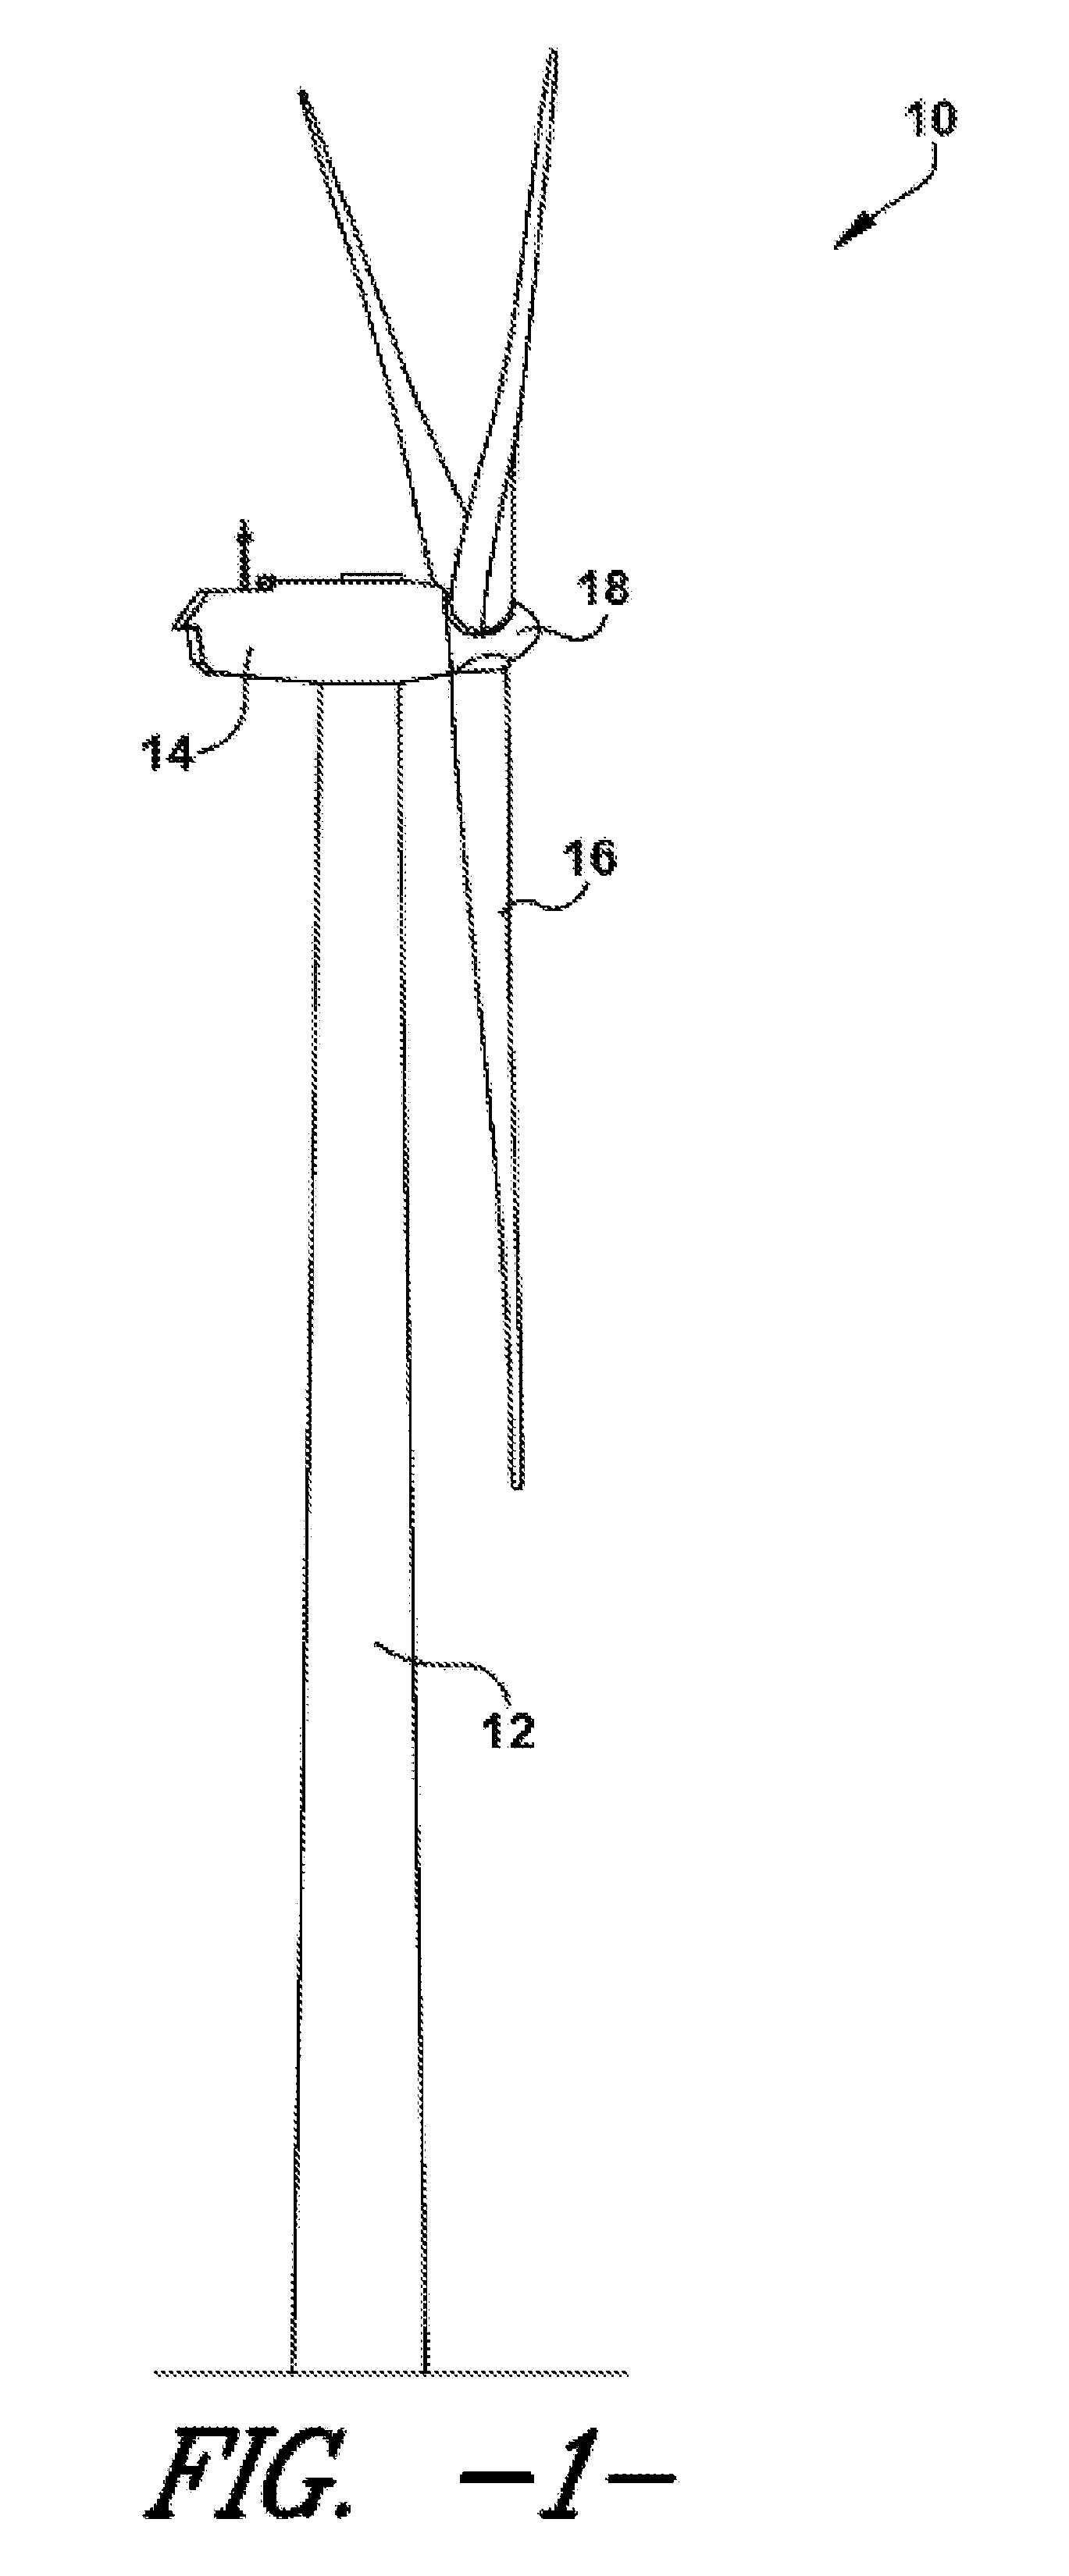 Joint design for rotor blade segments of a wind turbine